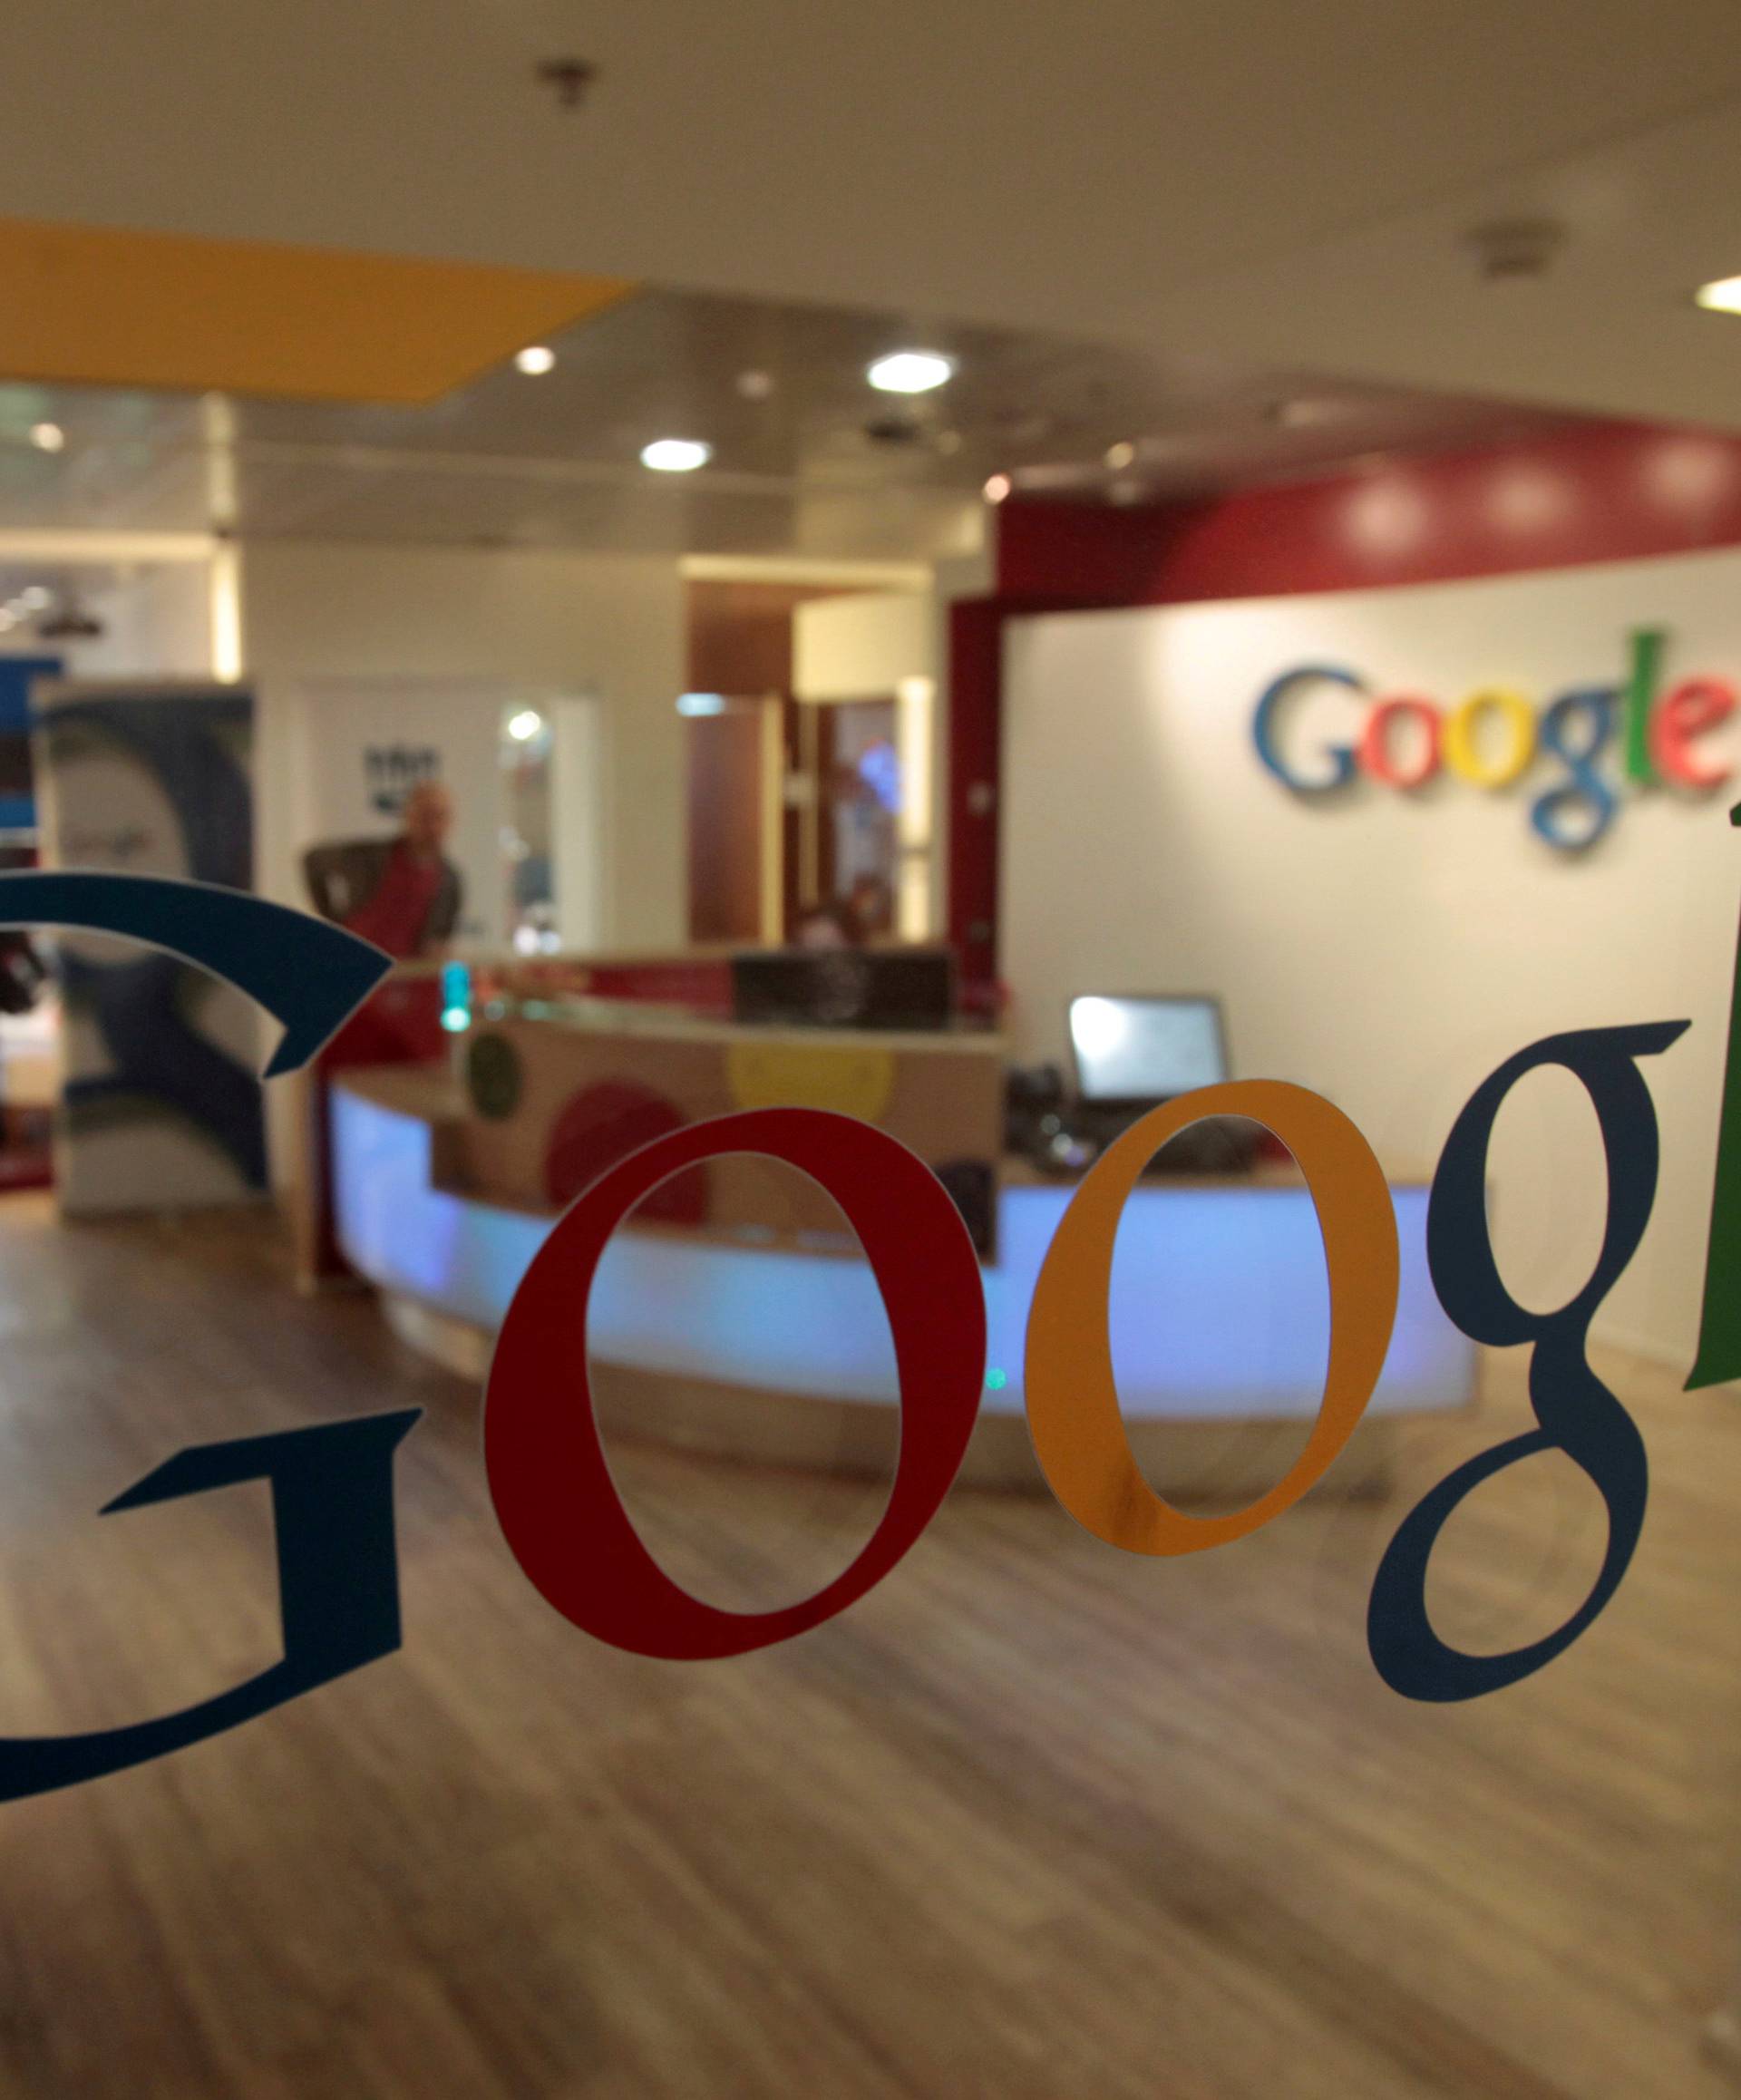 FILE PHOTO: The Google logo is seen on a door at the company's office in Tel Aviv